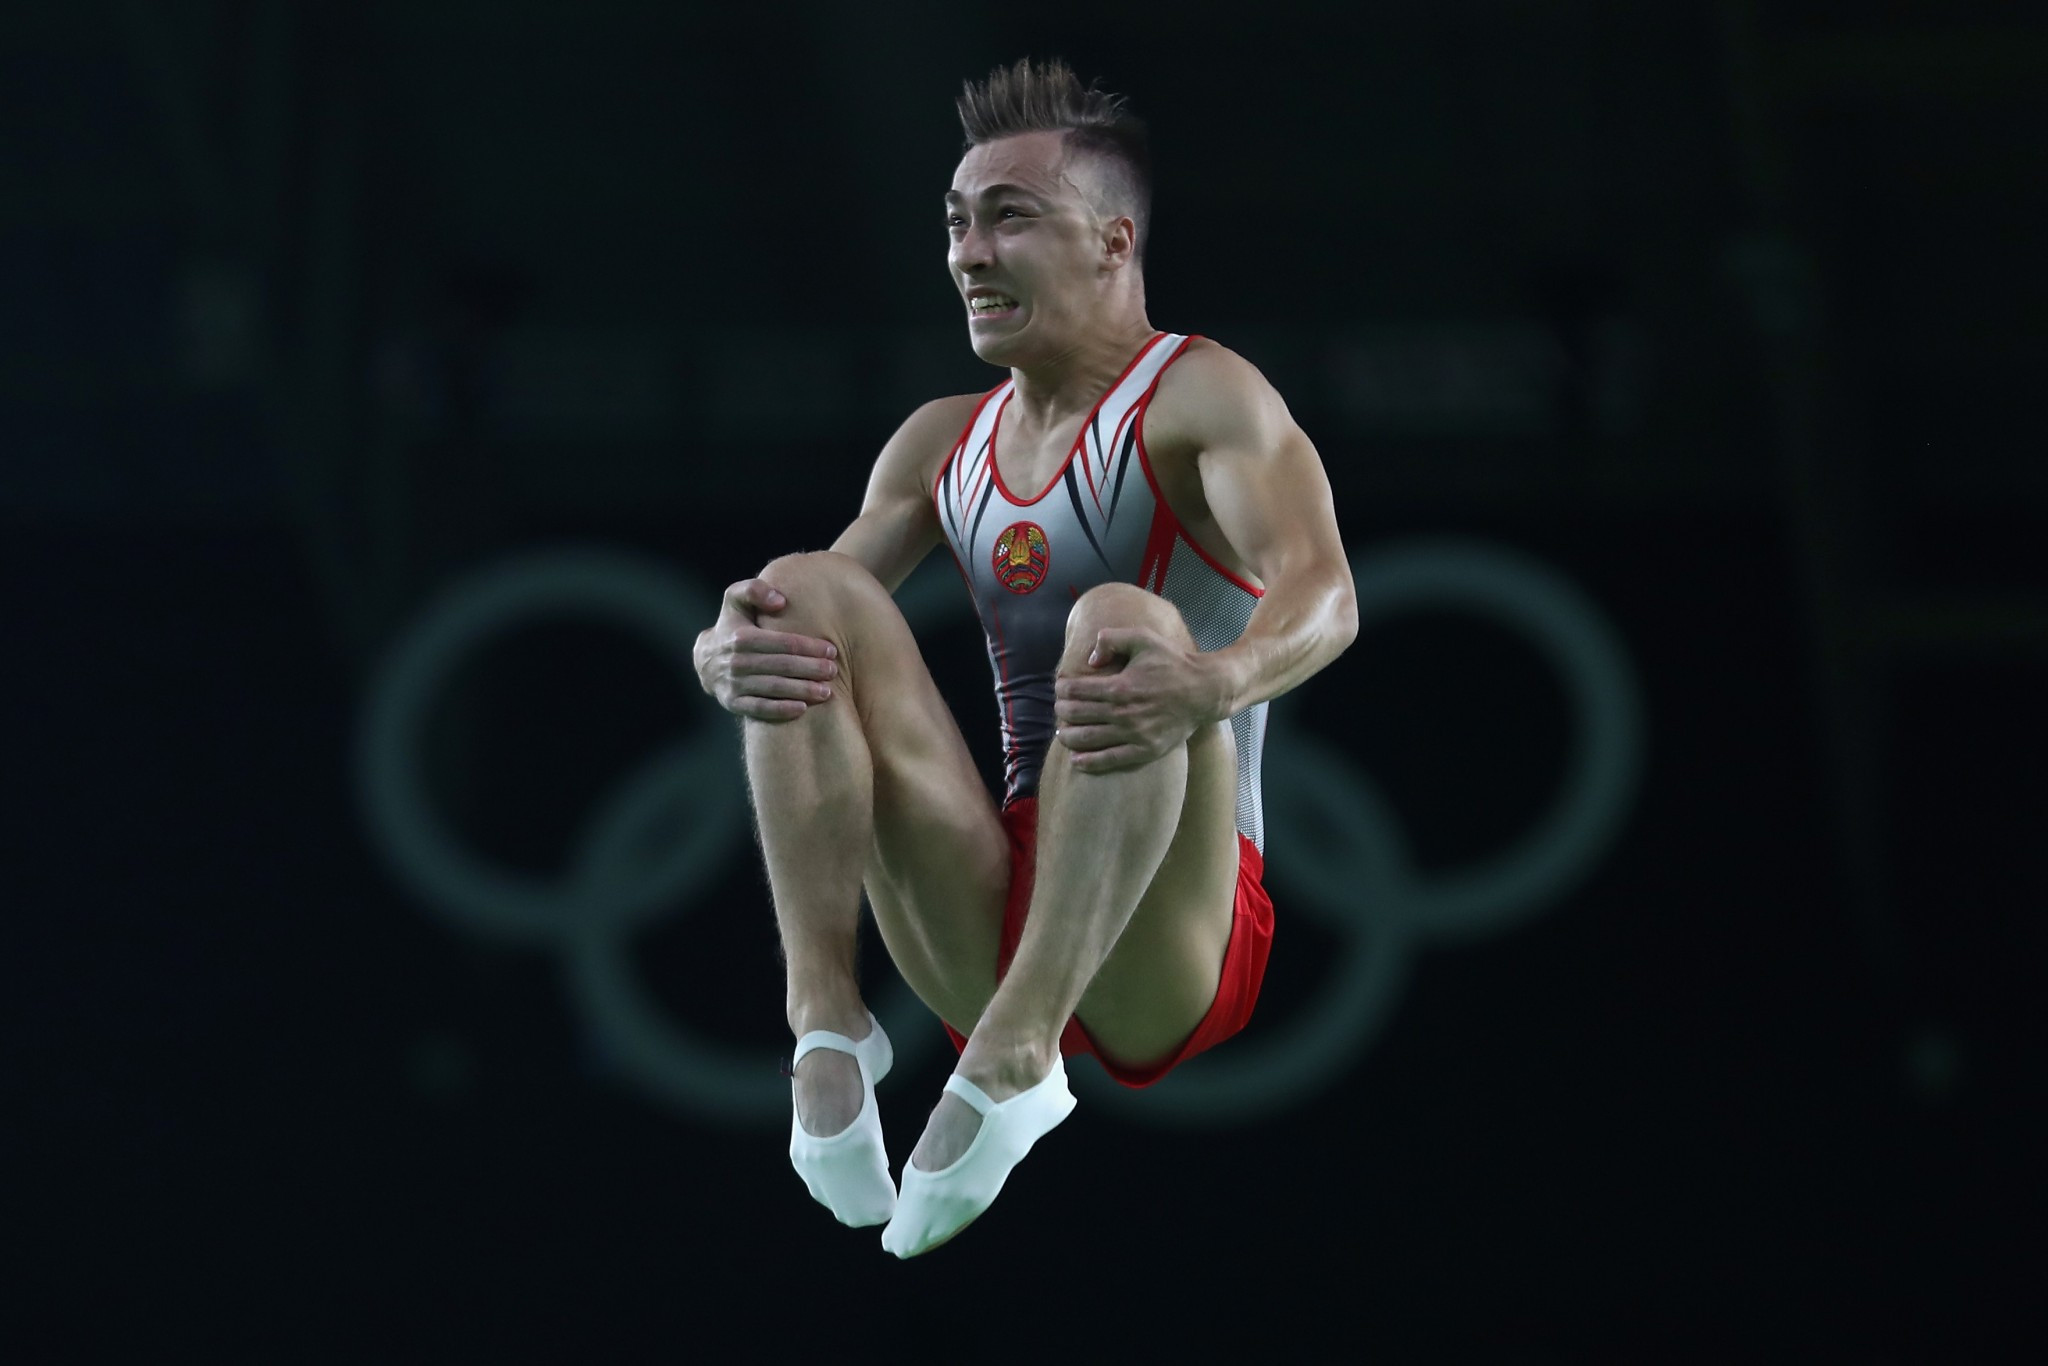 Uladzislau Hancharou won an Olympic gold medal in trampoline for Belarus at Rio 2016 ©Getty Images